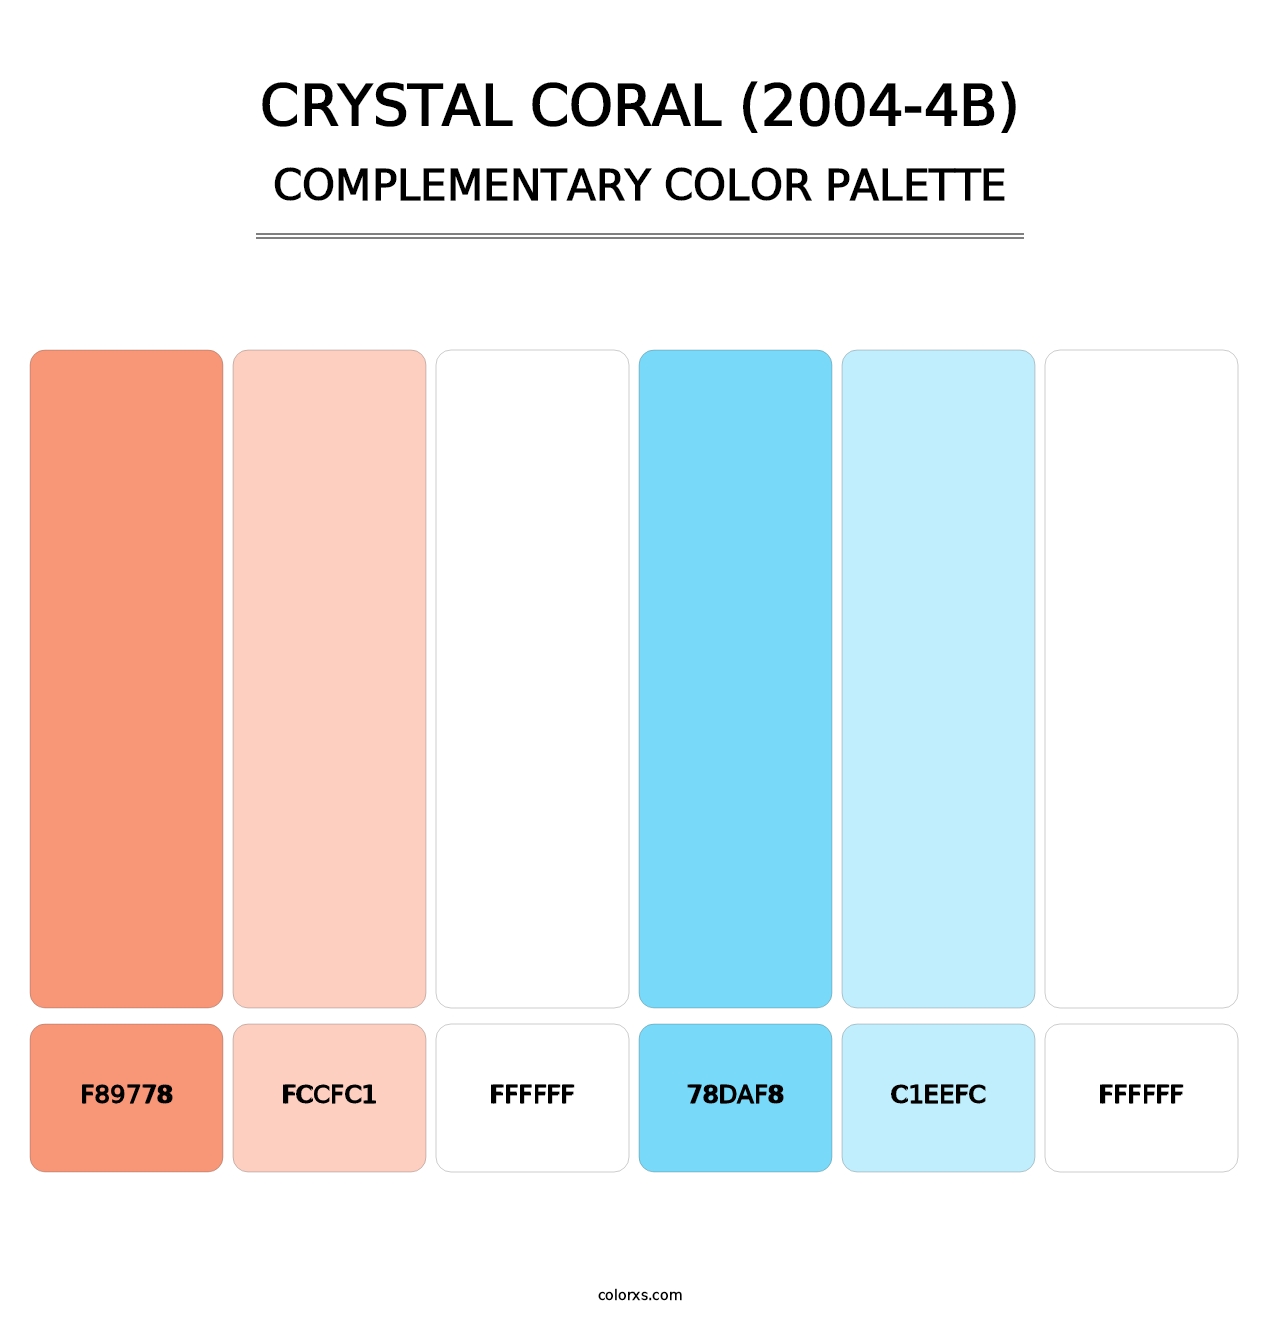 Crystal Coral (2004-4B) - Complementary Color Palette